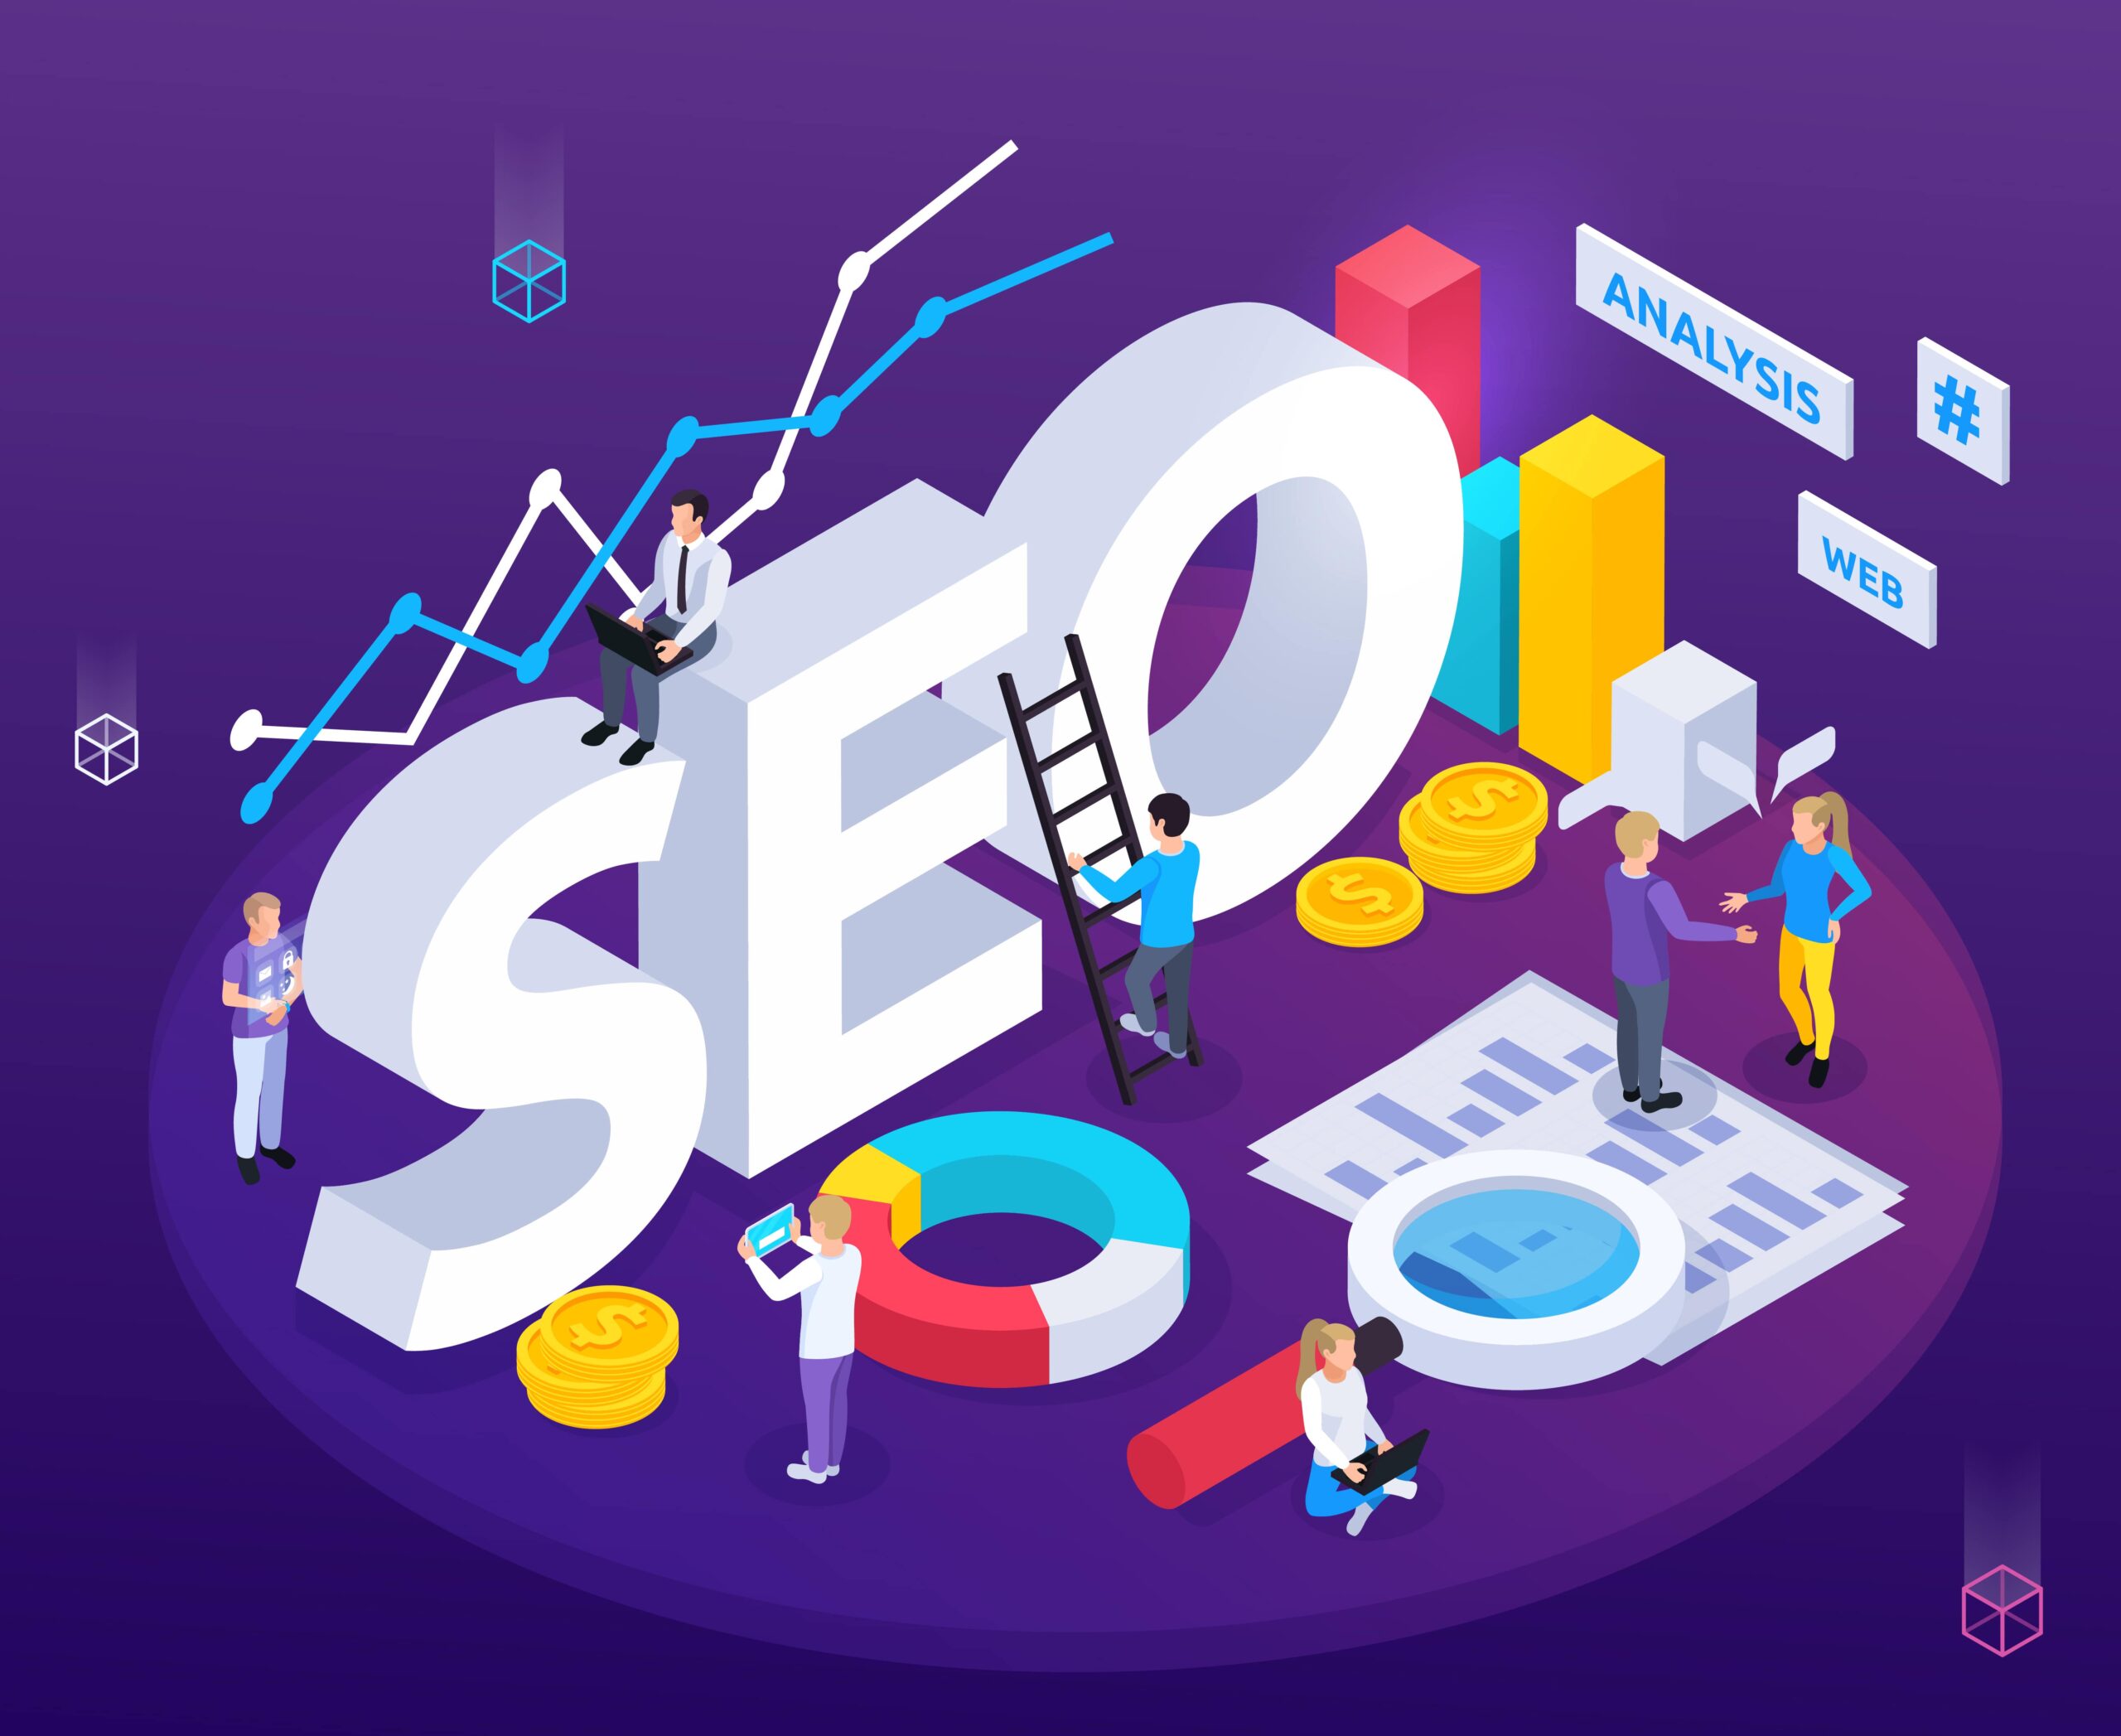 THE BEST SEO STRATEGY 2021